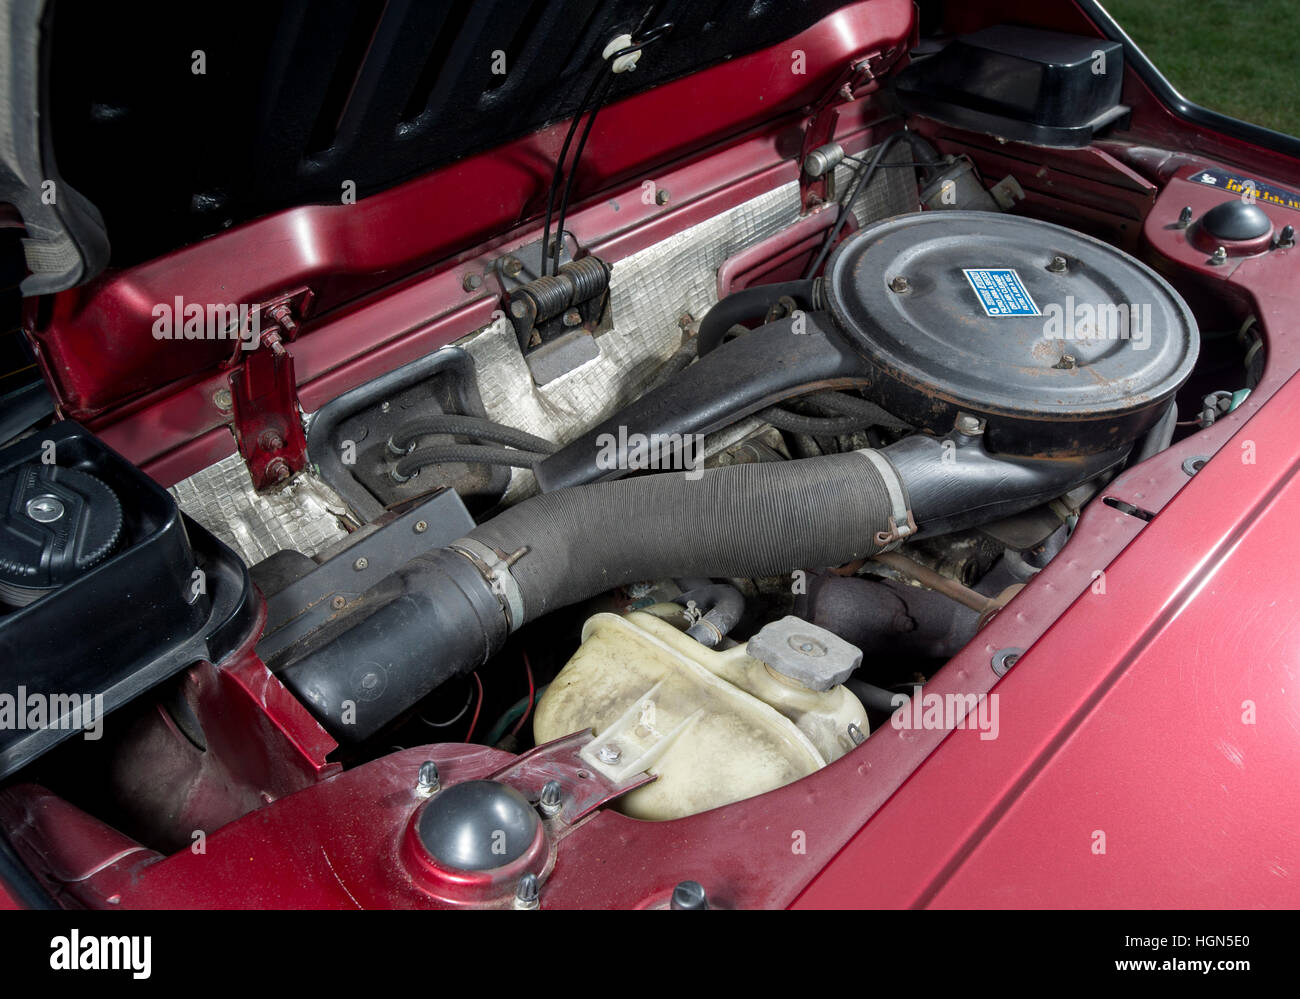 Engine of a 1988 Fiat X1/9 mid engined sports car, designed by Bertone Stock Photo